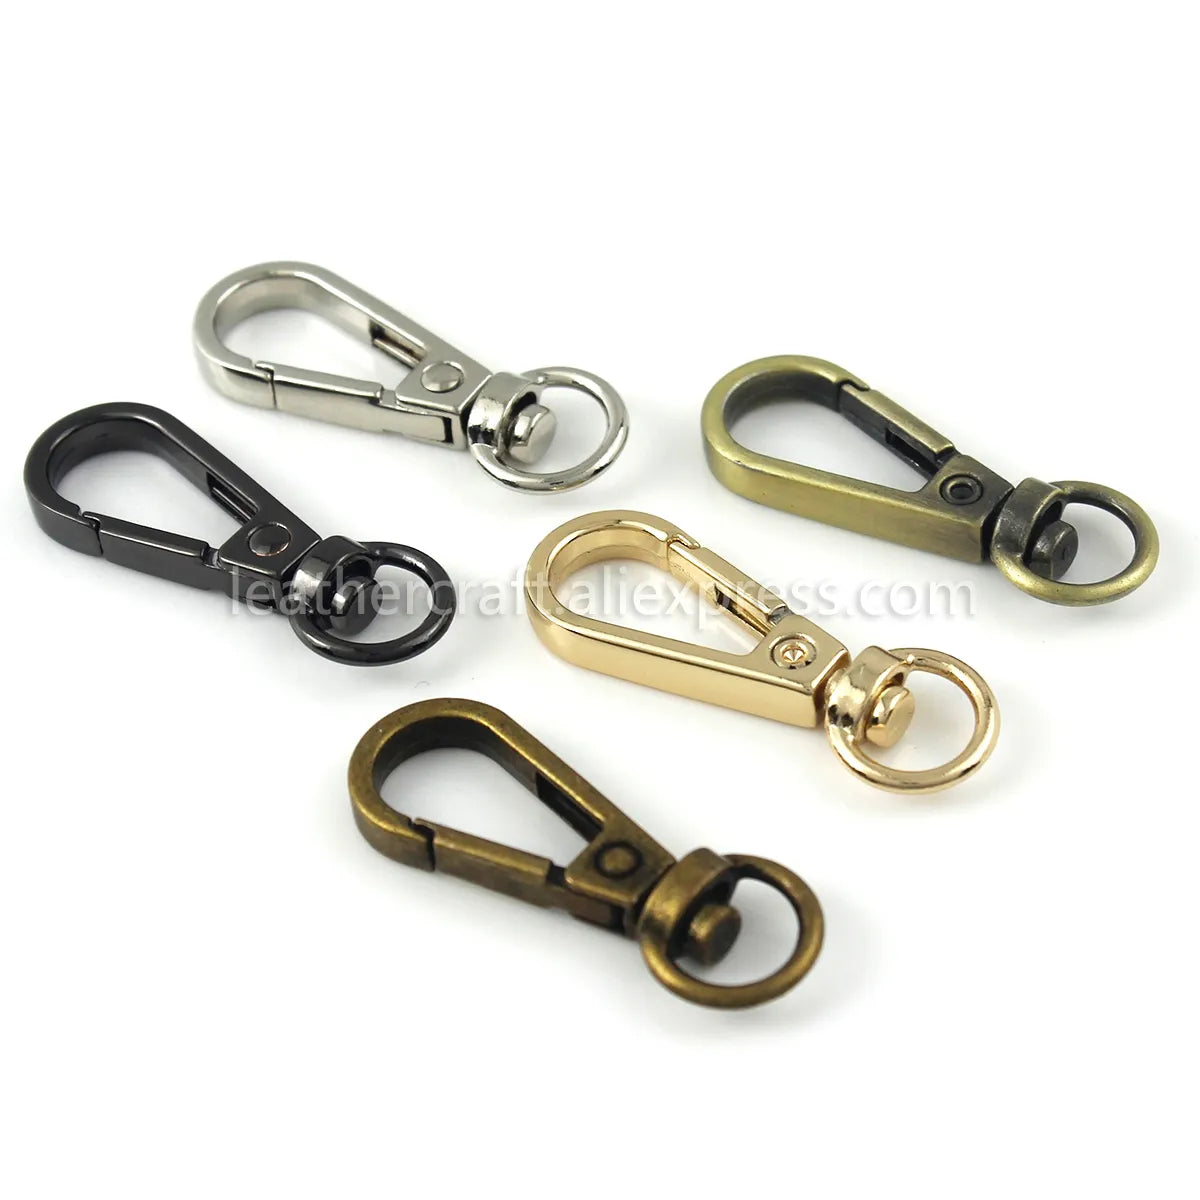 1pcs Metal Swivel O-ring Eye Snap Hook Trigger Clasps Clips for Leather Craft Bag Strap Belt Webbing Keychain Small Size